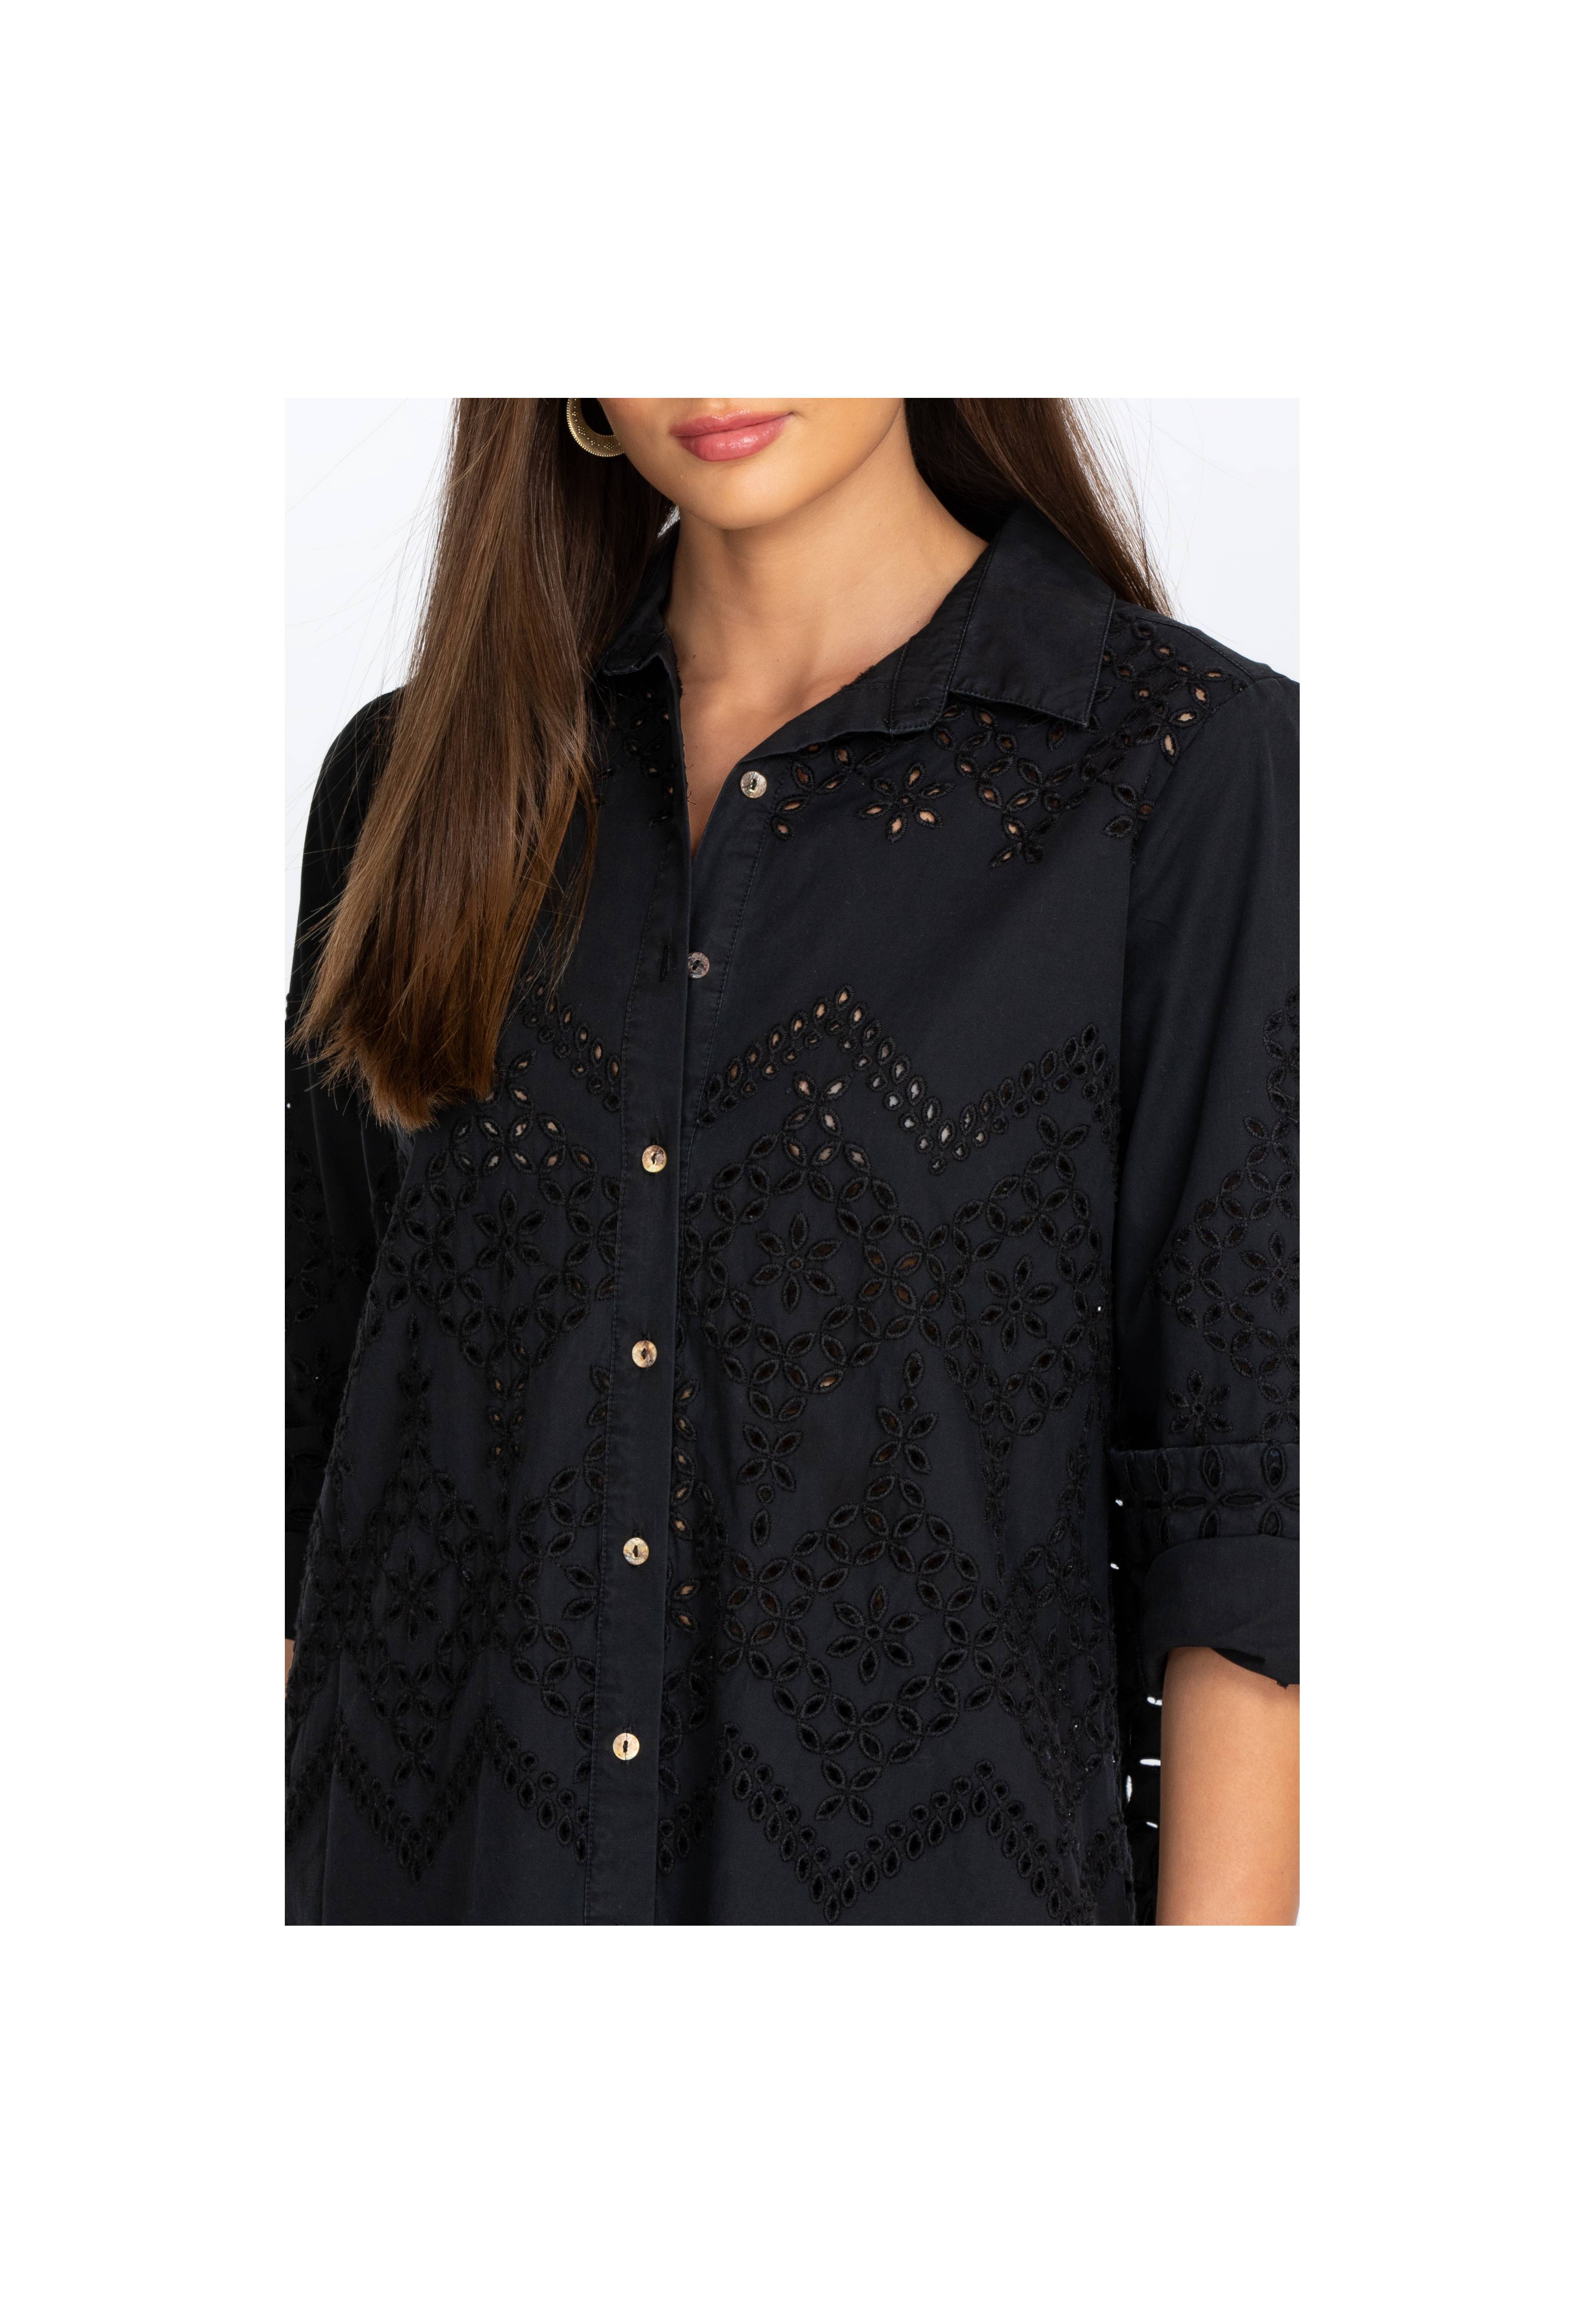 Lynx Button Down Shirt, , large image number 5